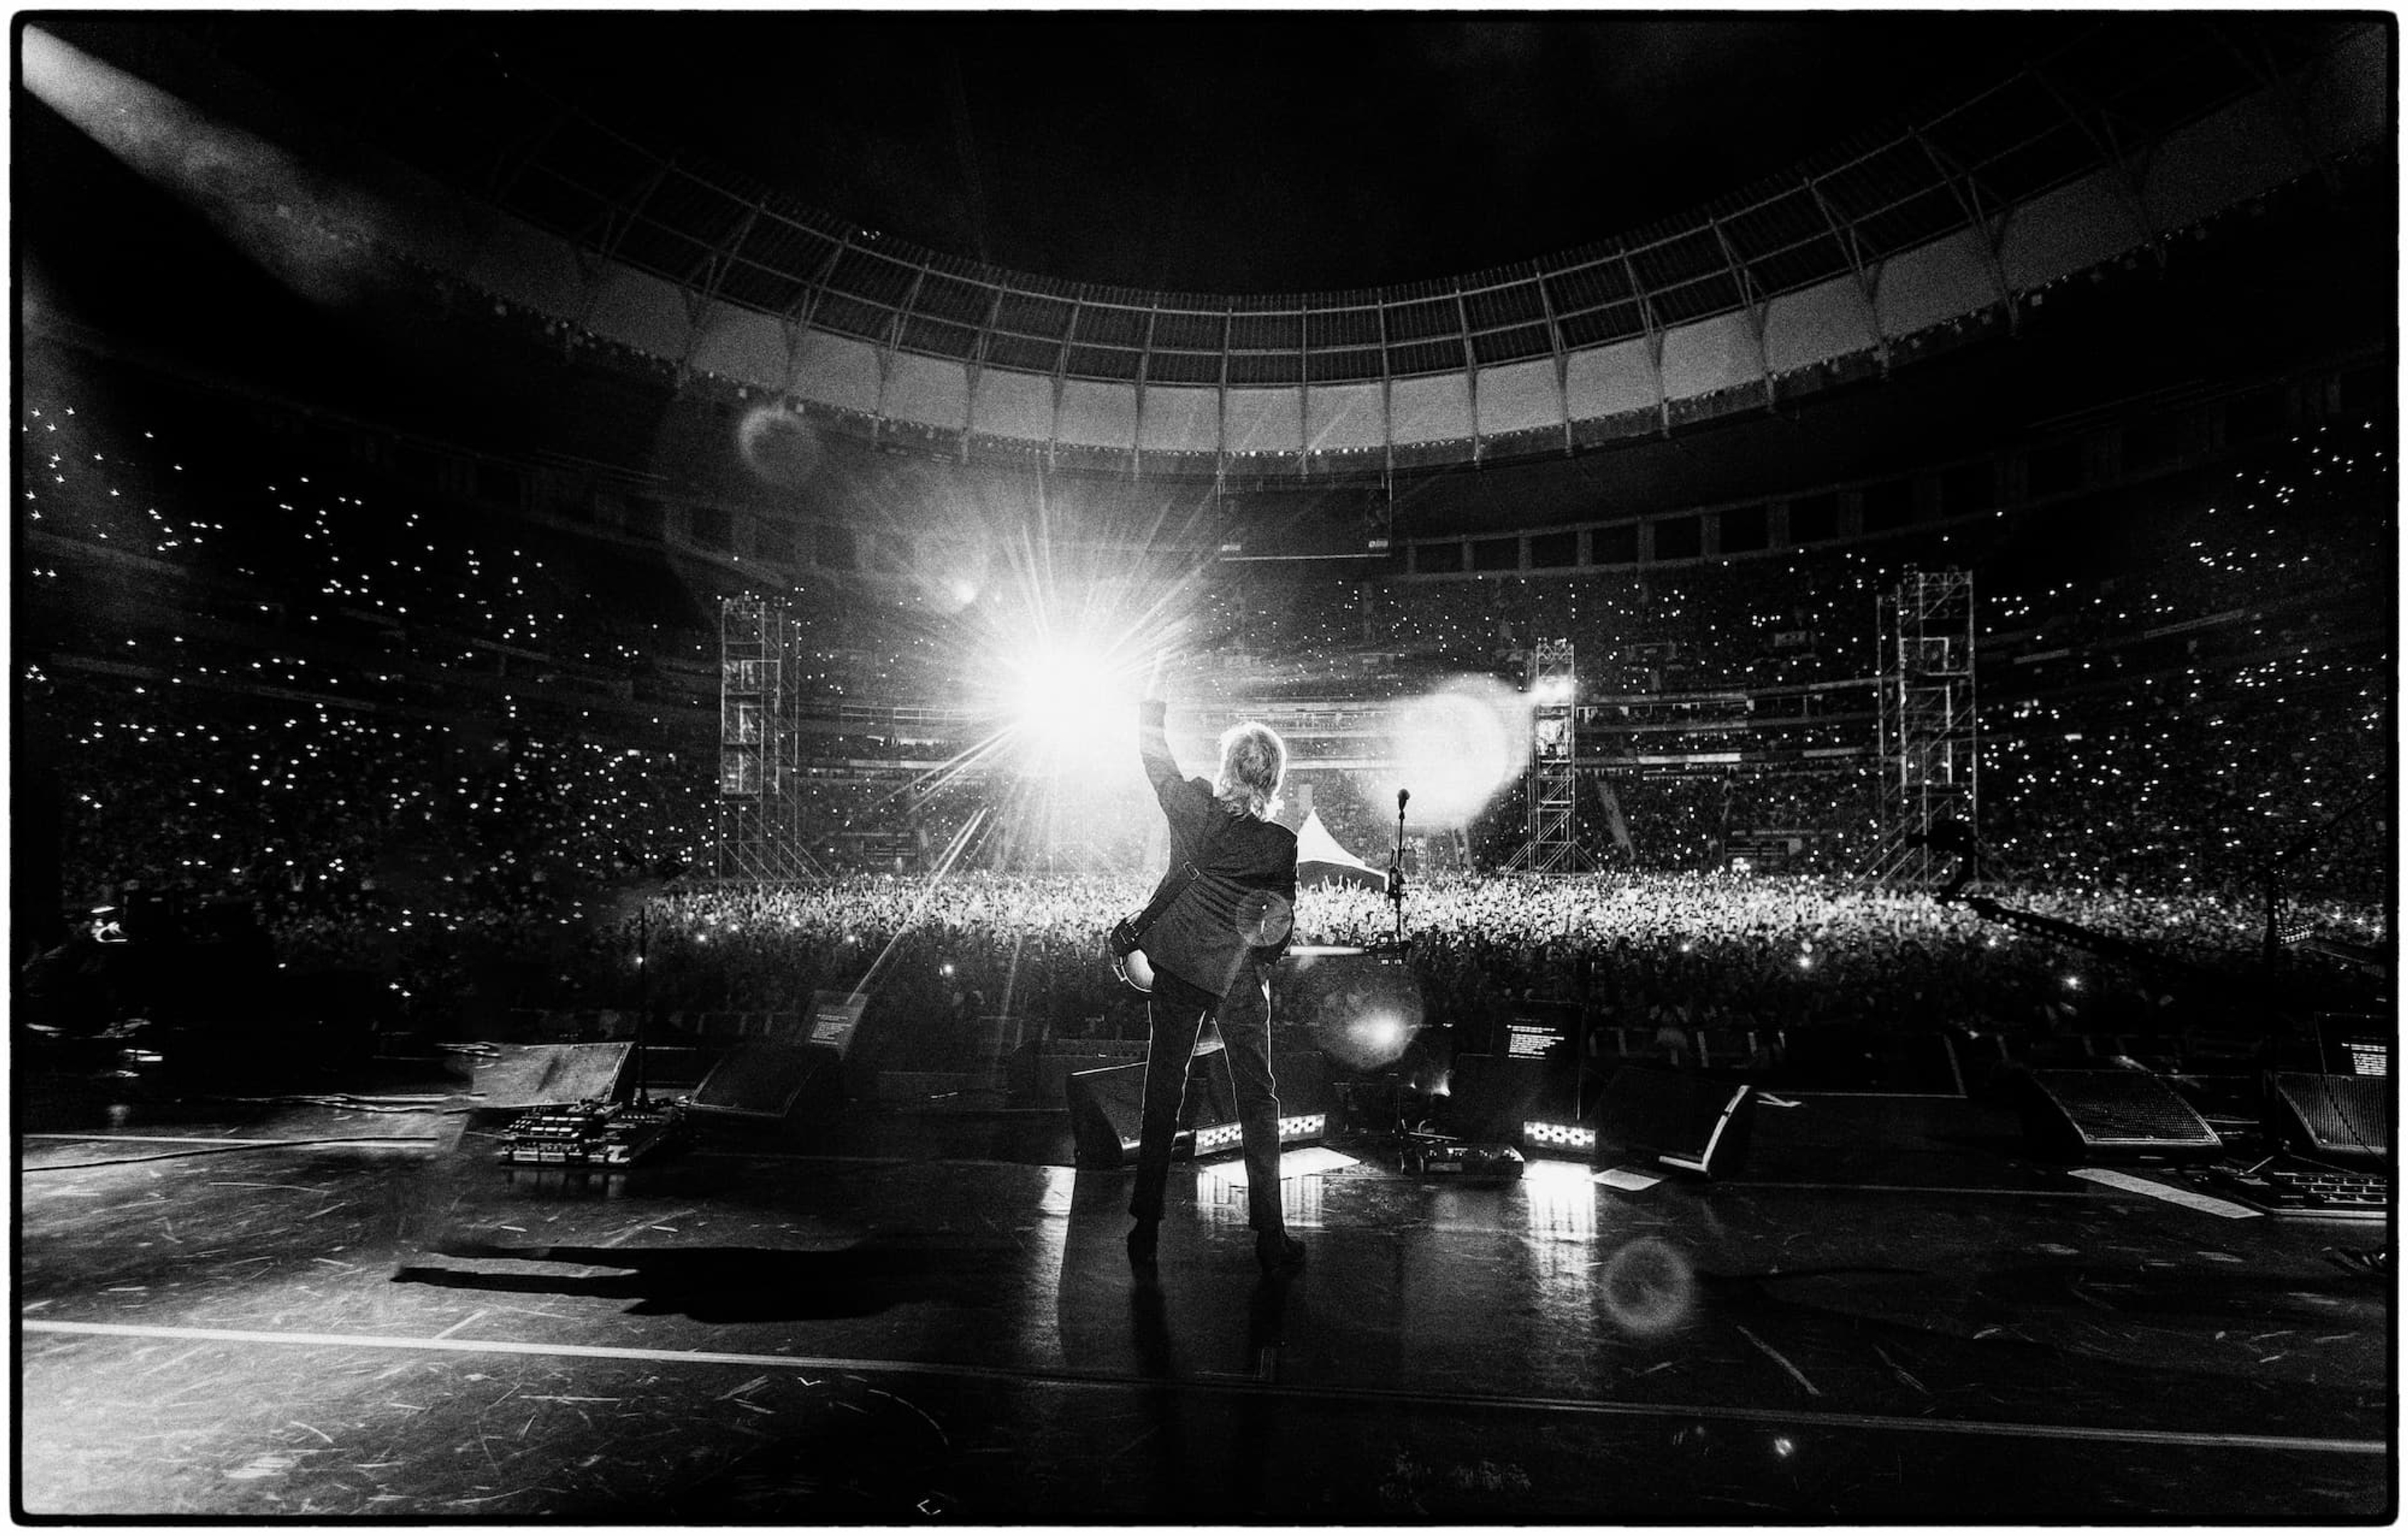 Black and white photograph of Paul McCartney raising his hand in the air while on stage in front of a sold-out crowd at Mané Garrincha Stadium in Brasília.